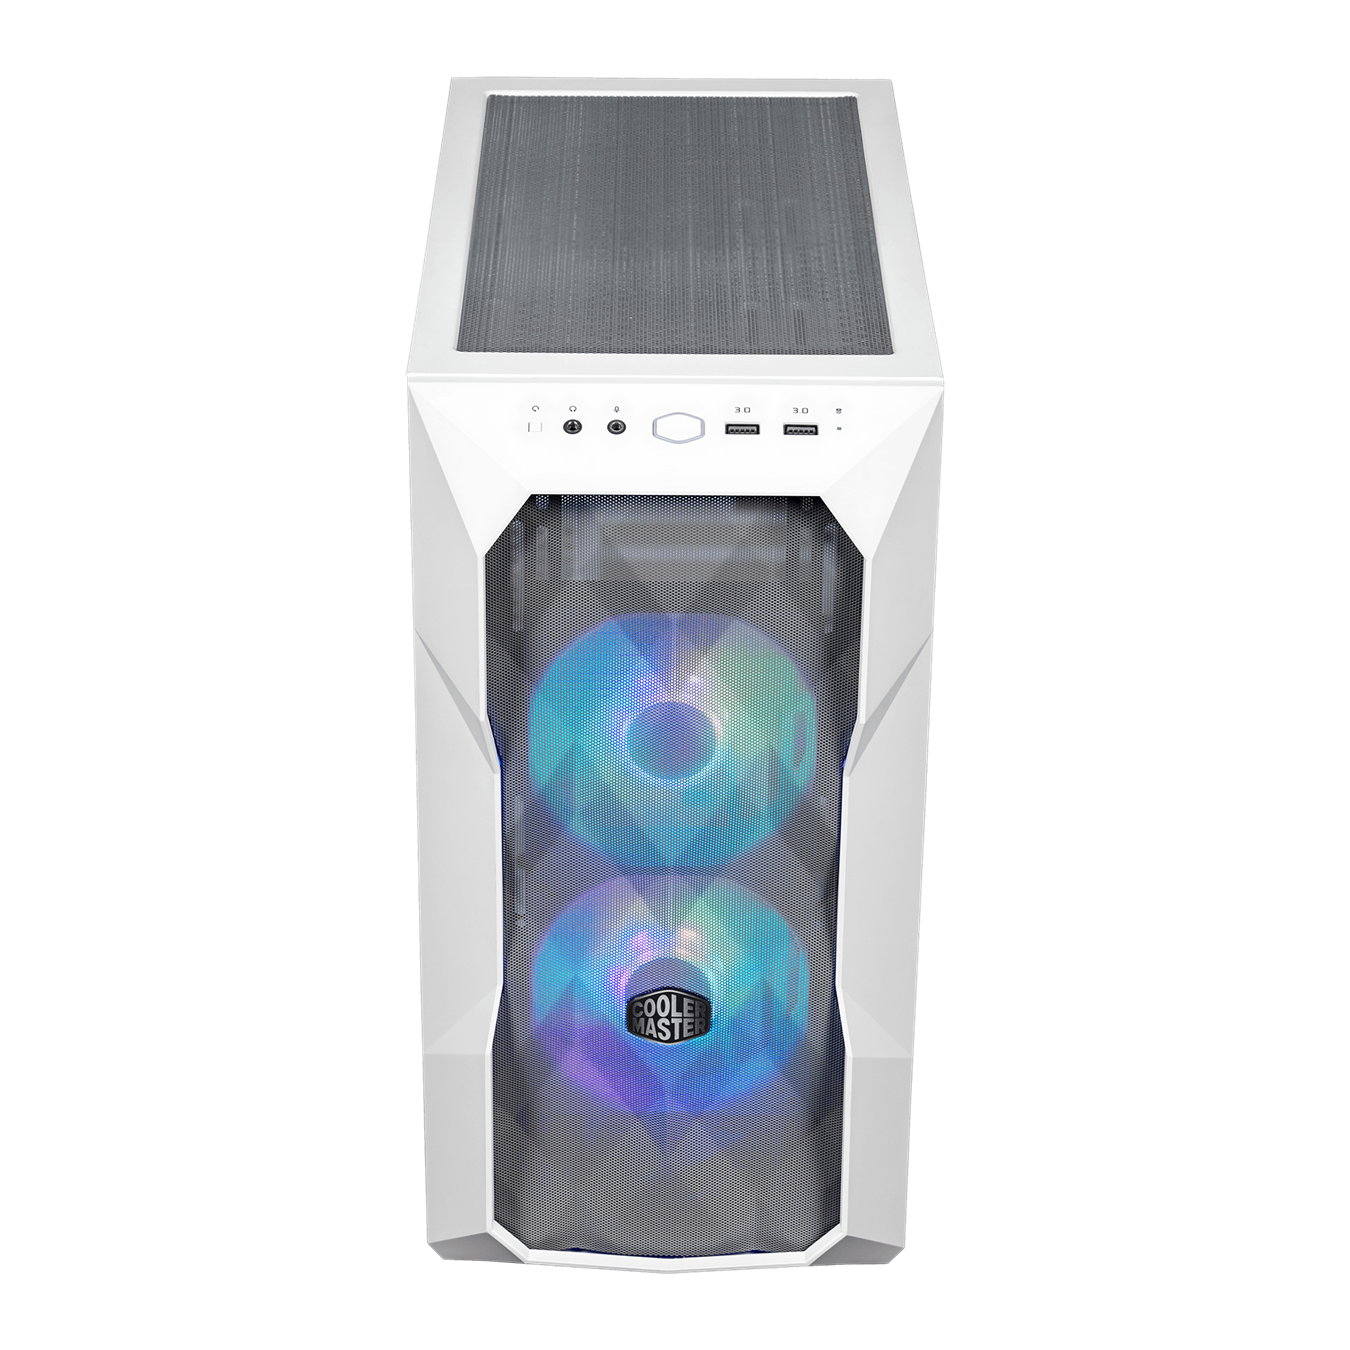 45 degree front view of the white TD300 with mesh front panel and two ARGB SickleFlow fans. 